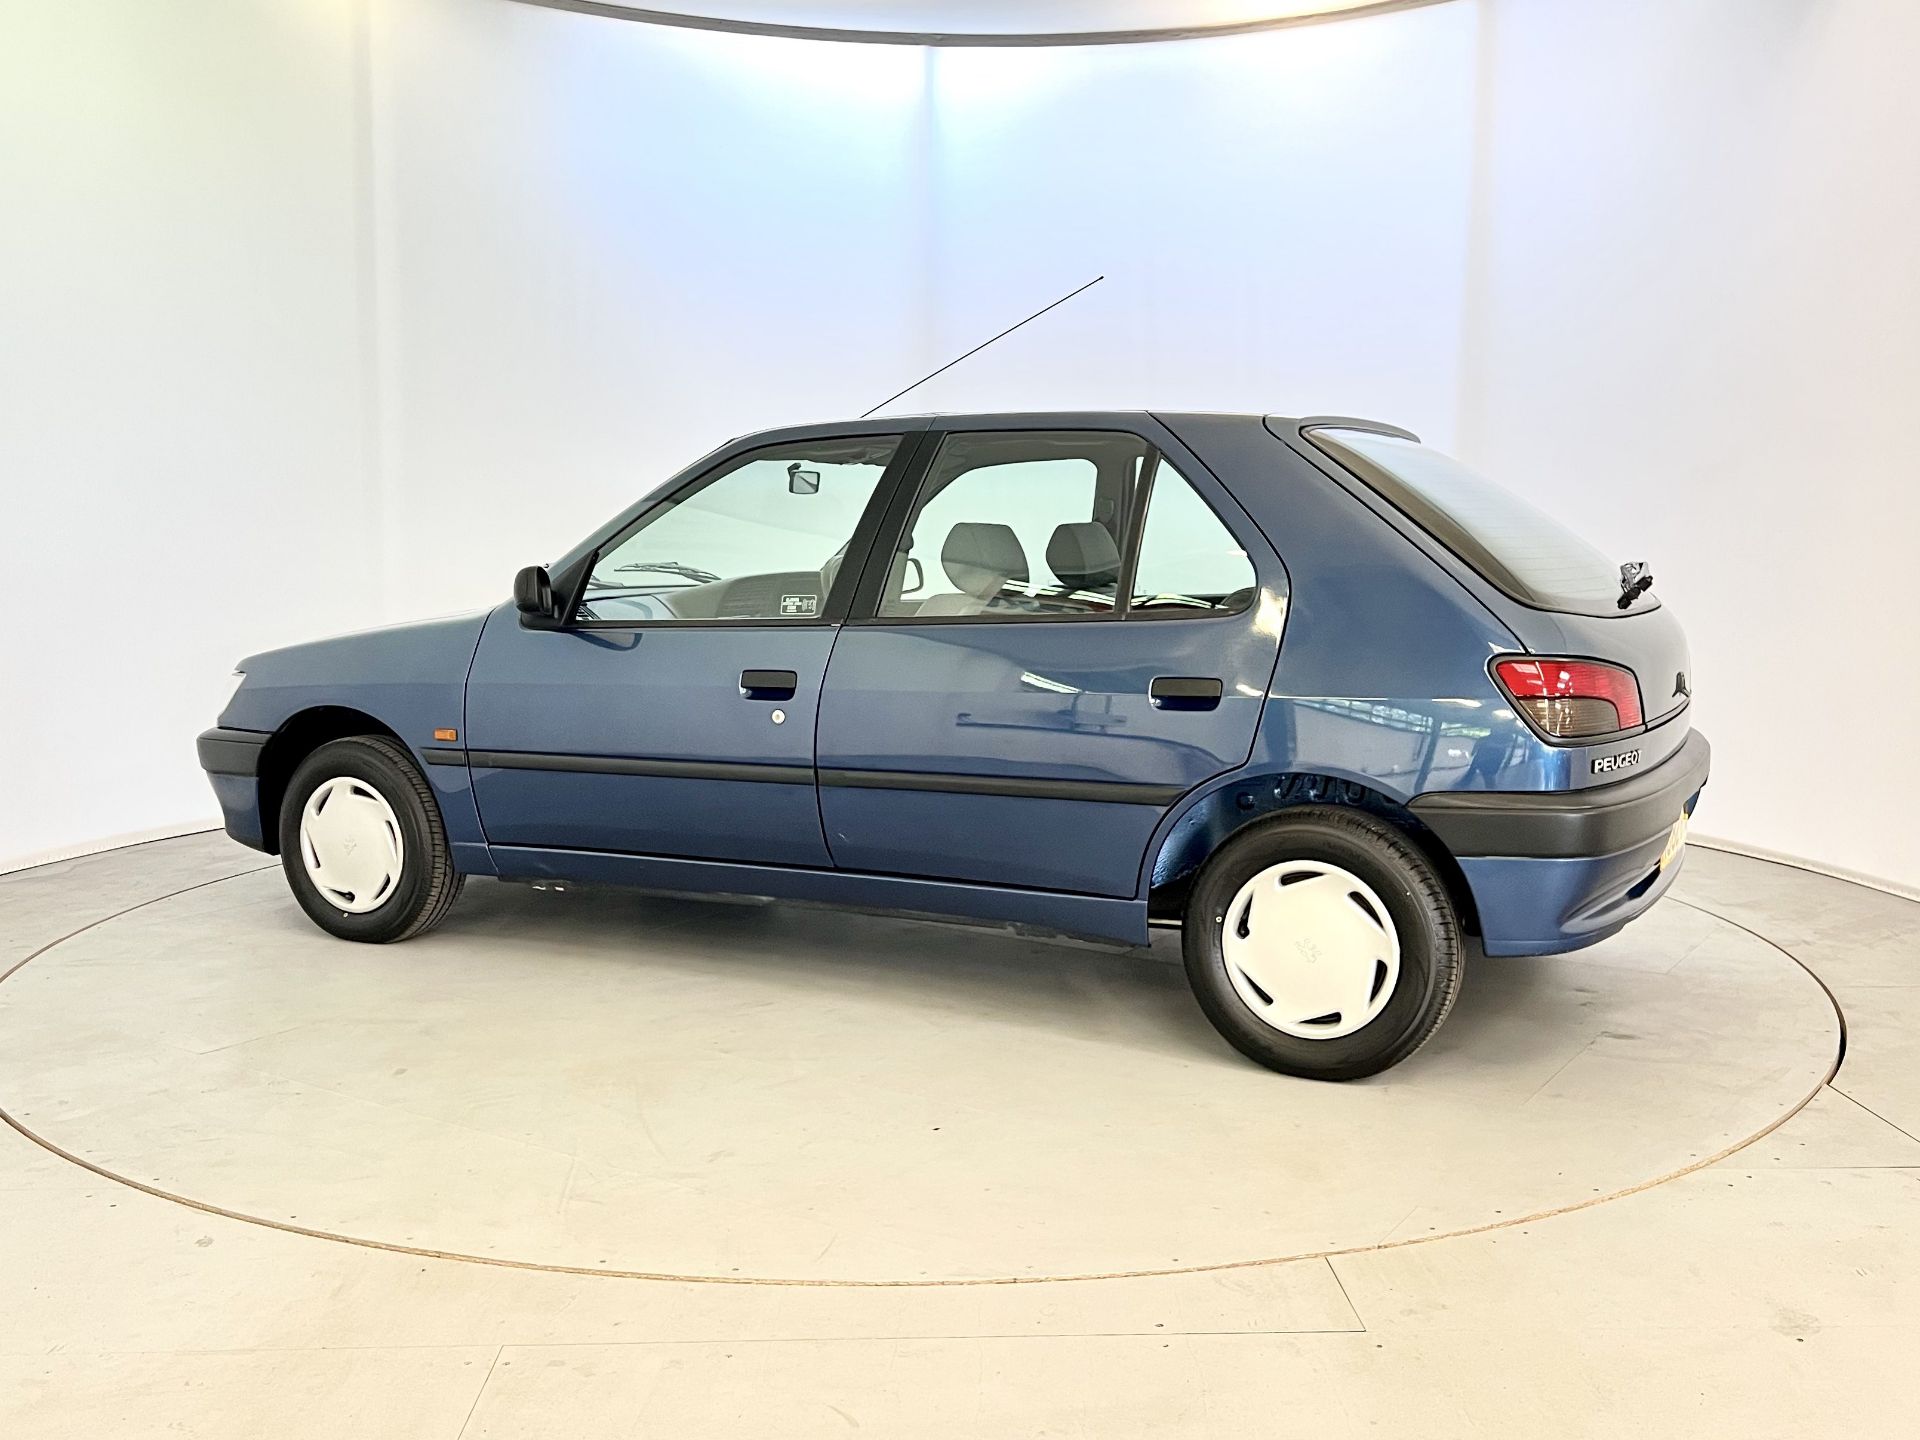 Peugeot 306 - Image 6 of 36